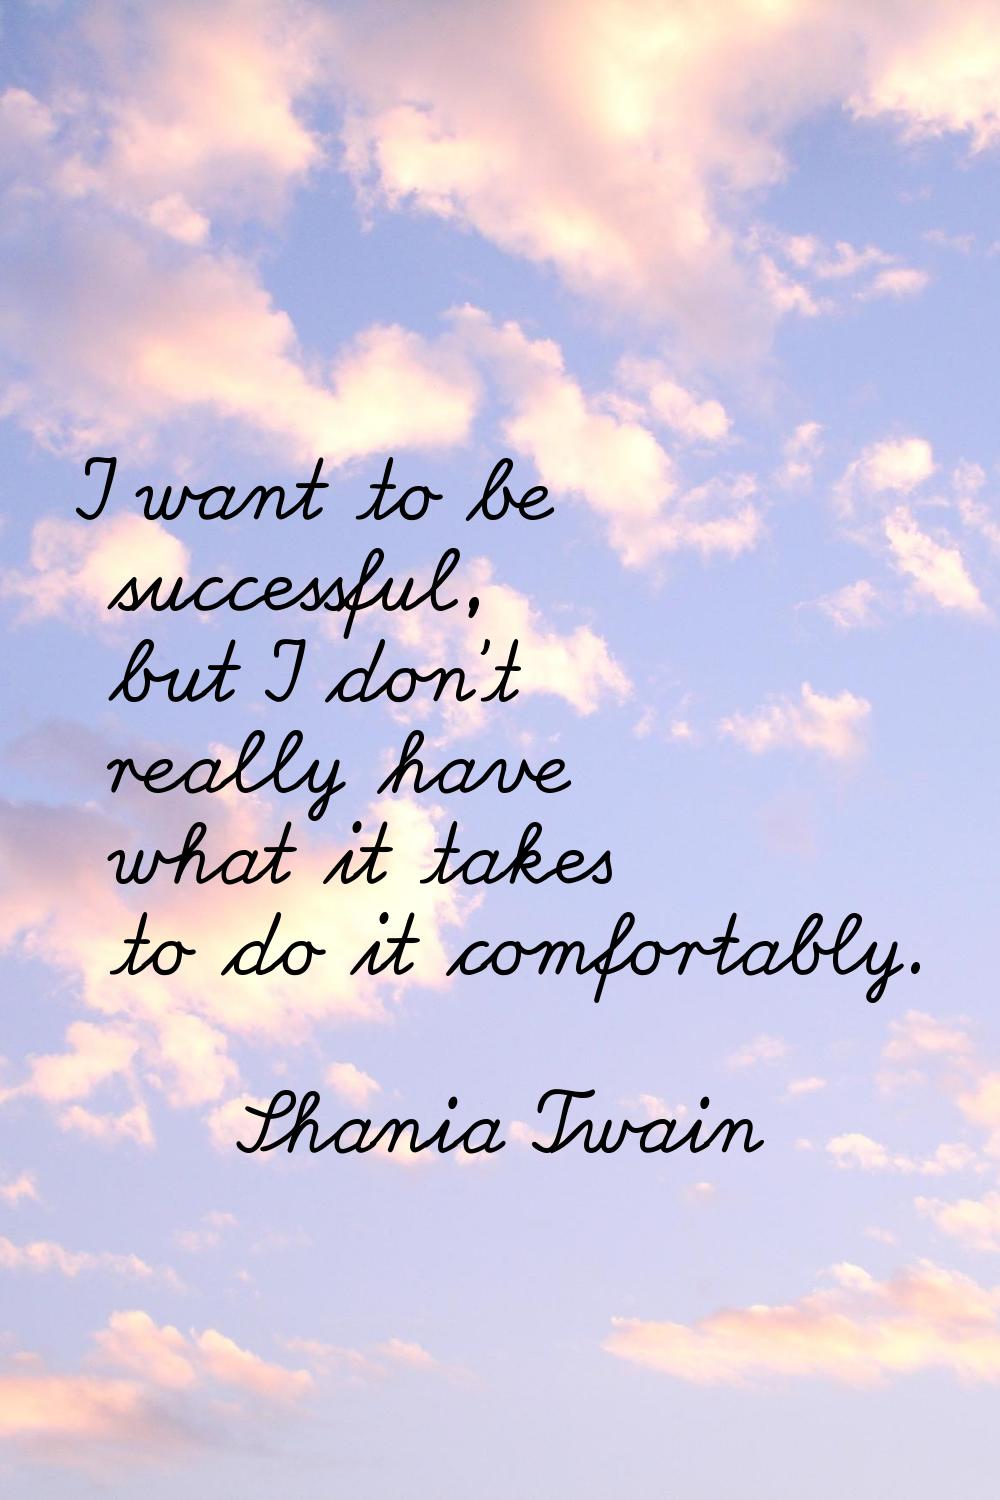 I want to be successful, but I don't really have what it takes to do it comfortably.